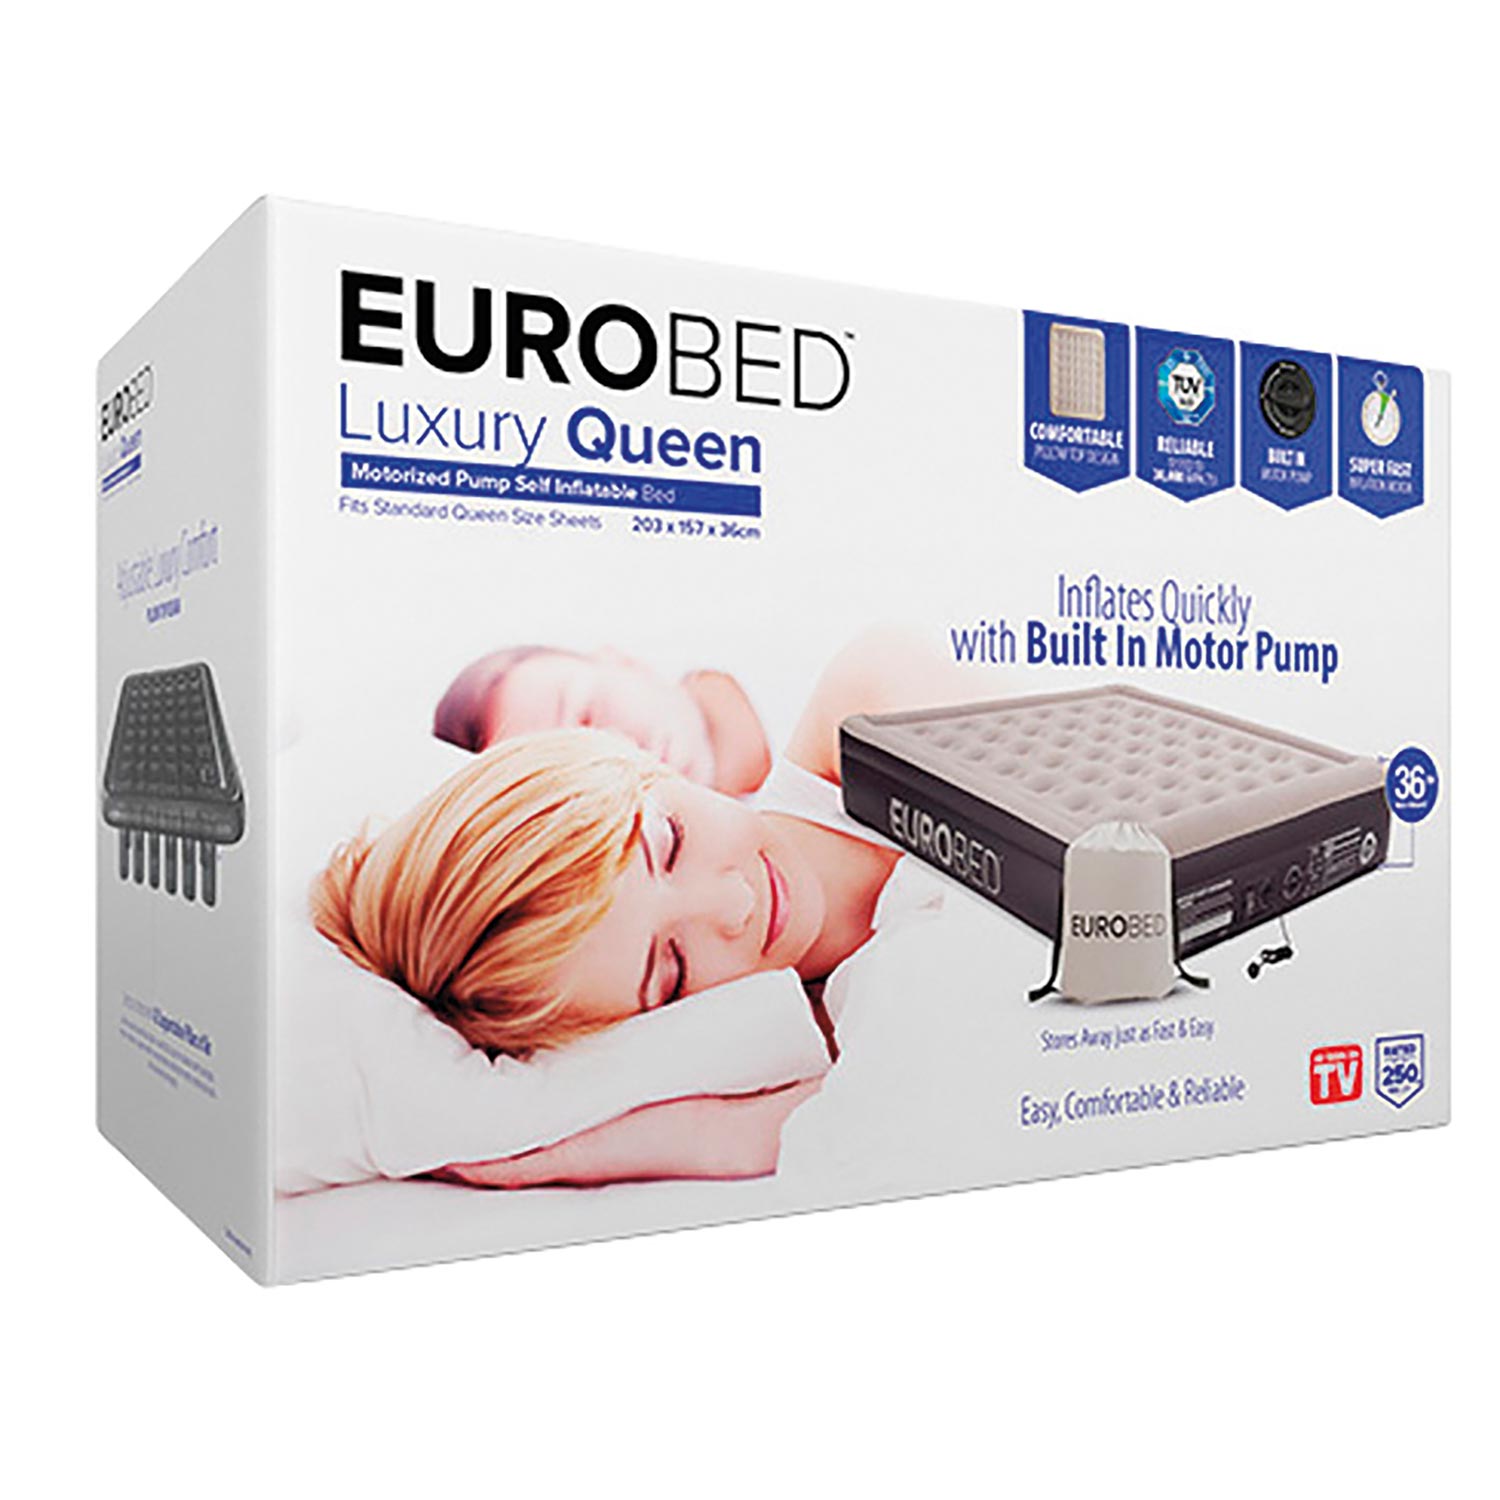 Original AS SEEN ON TV WITH PUMP-Free Postage-Genuine EUROBED LUXURY QUEEN 